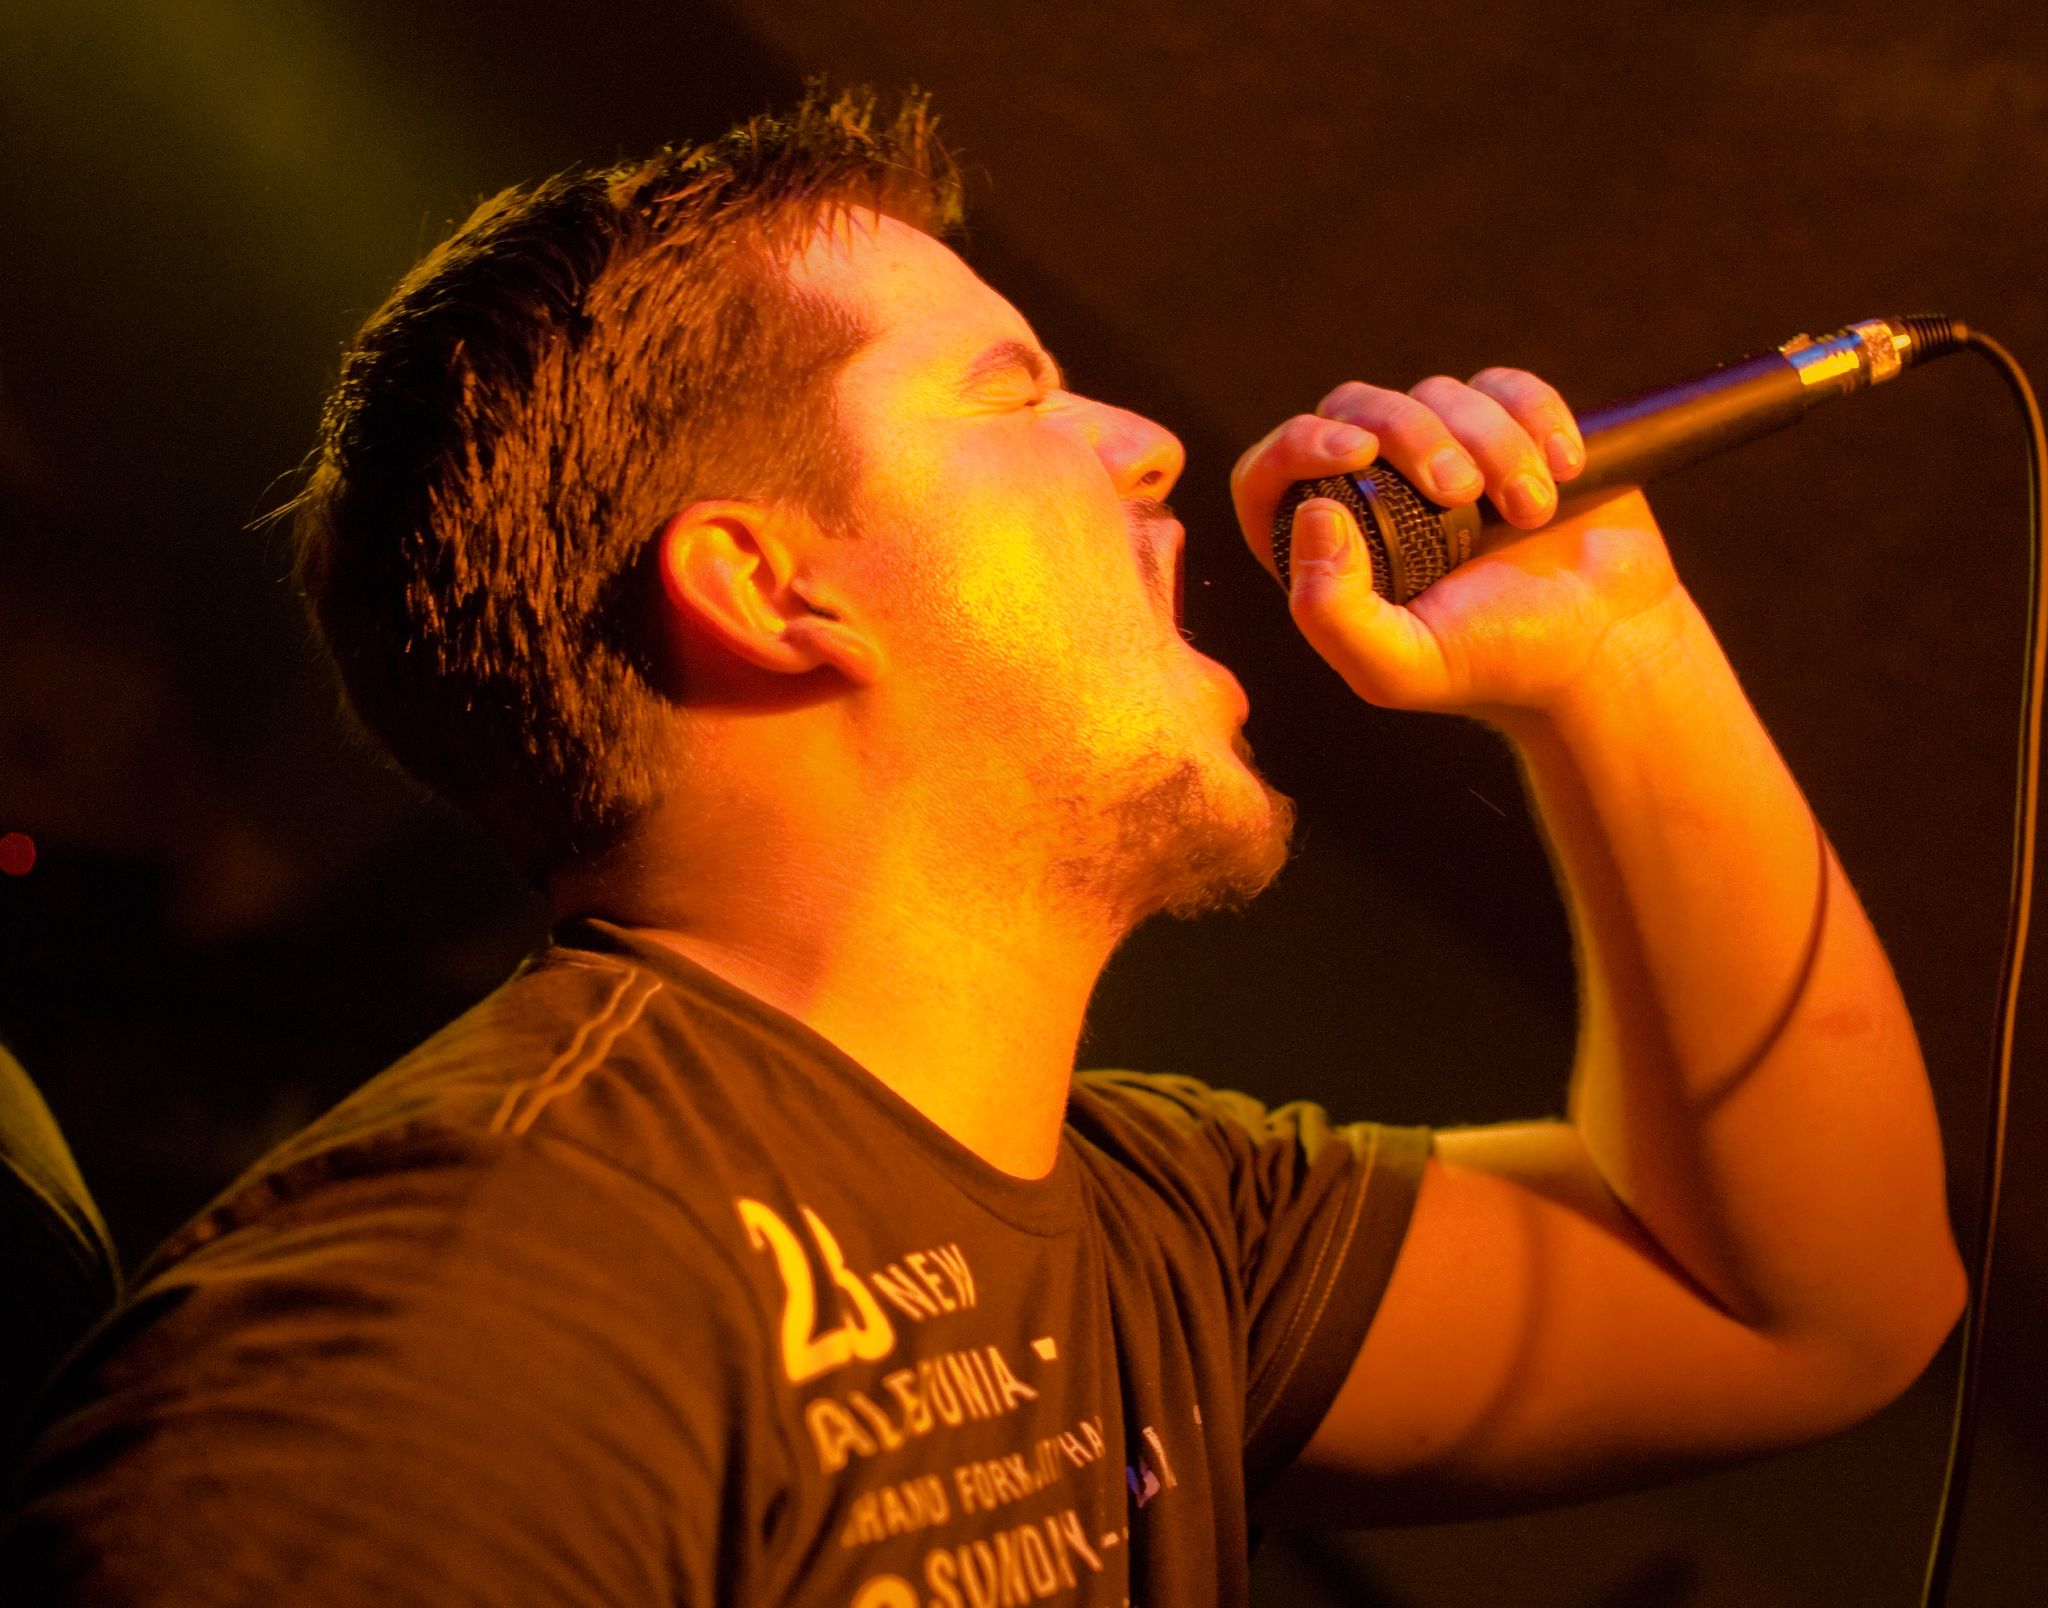 a man in a dark shirt singing into microphone